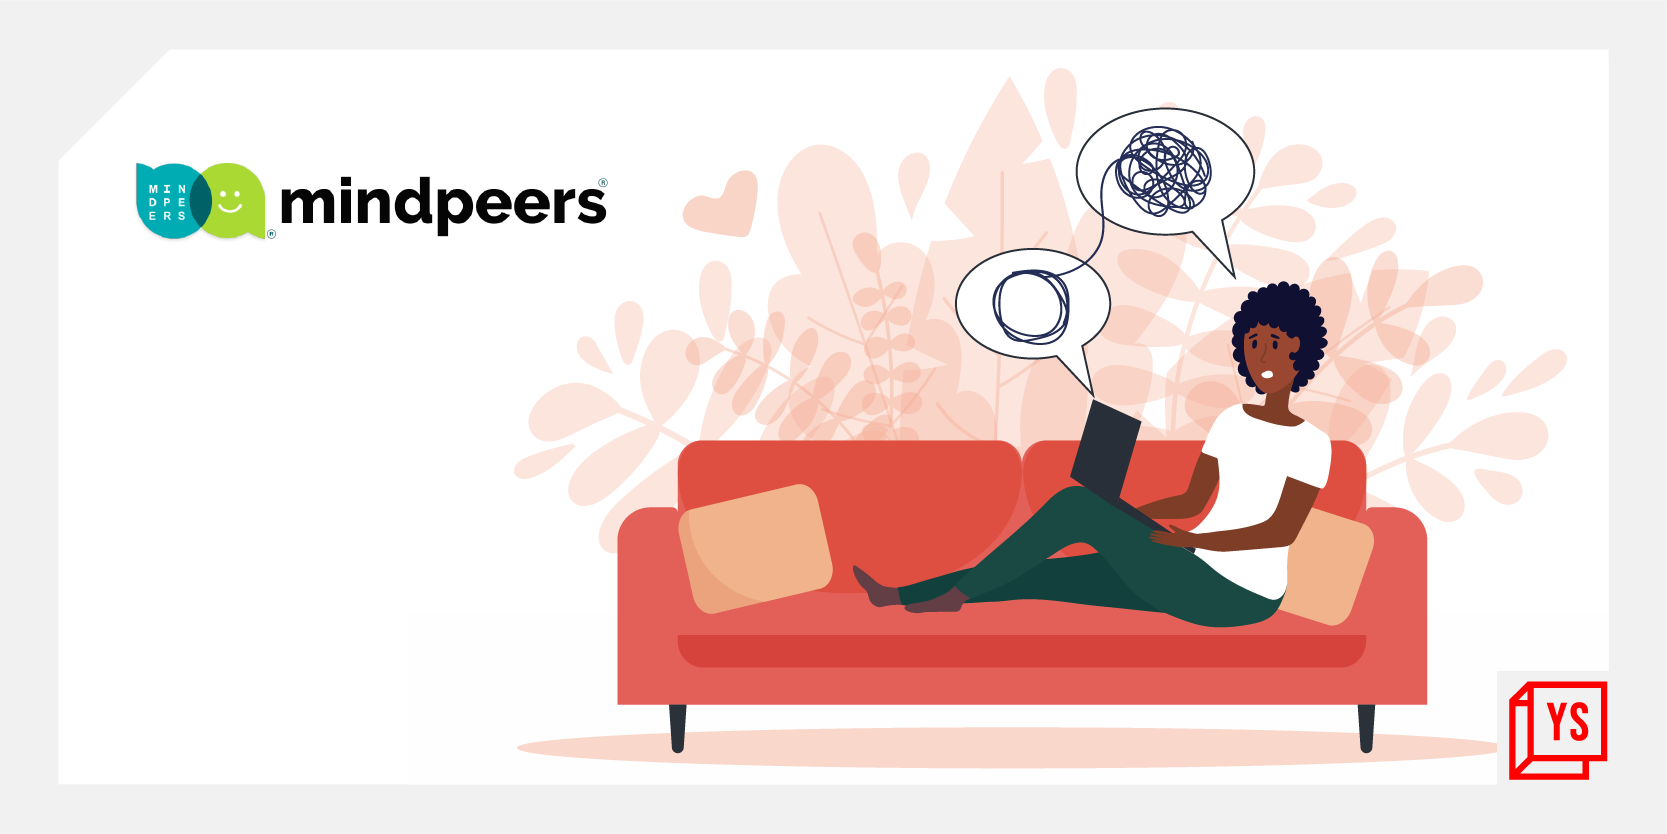 [App Friday] MindPeers focuses on mental health with free resources, but is a work in progress